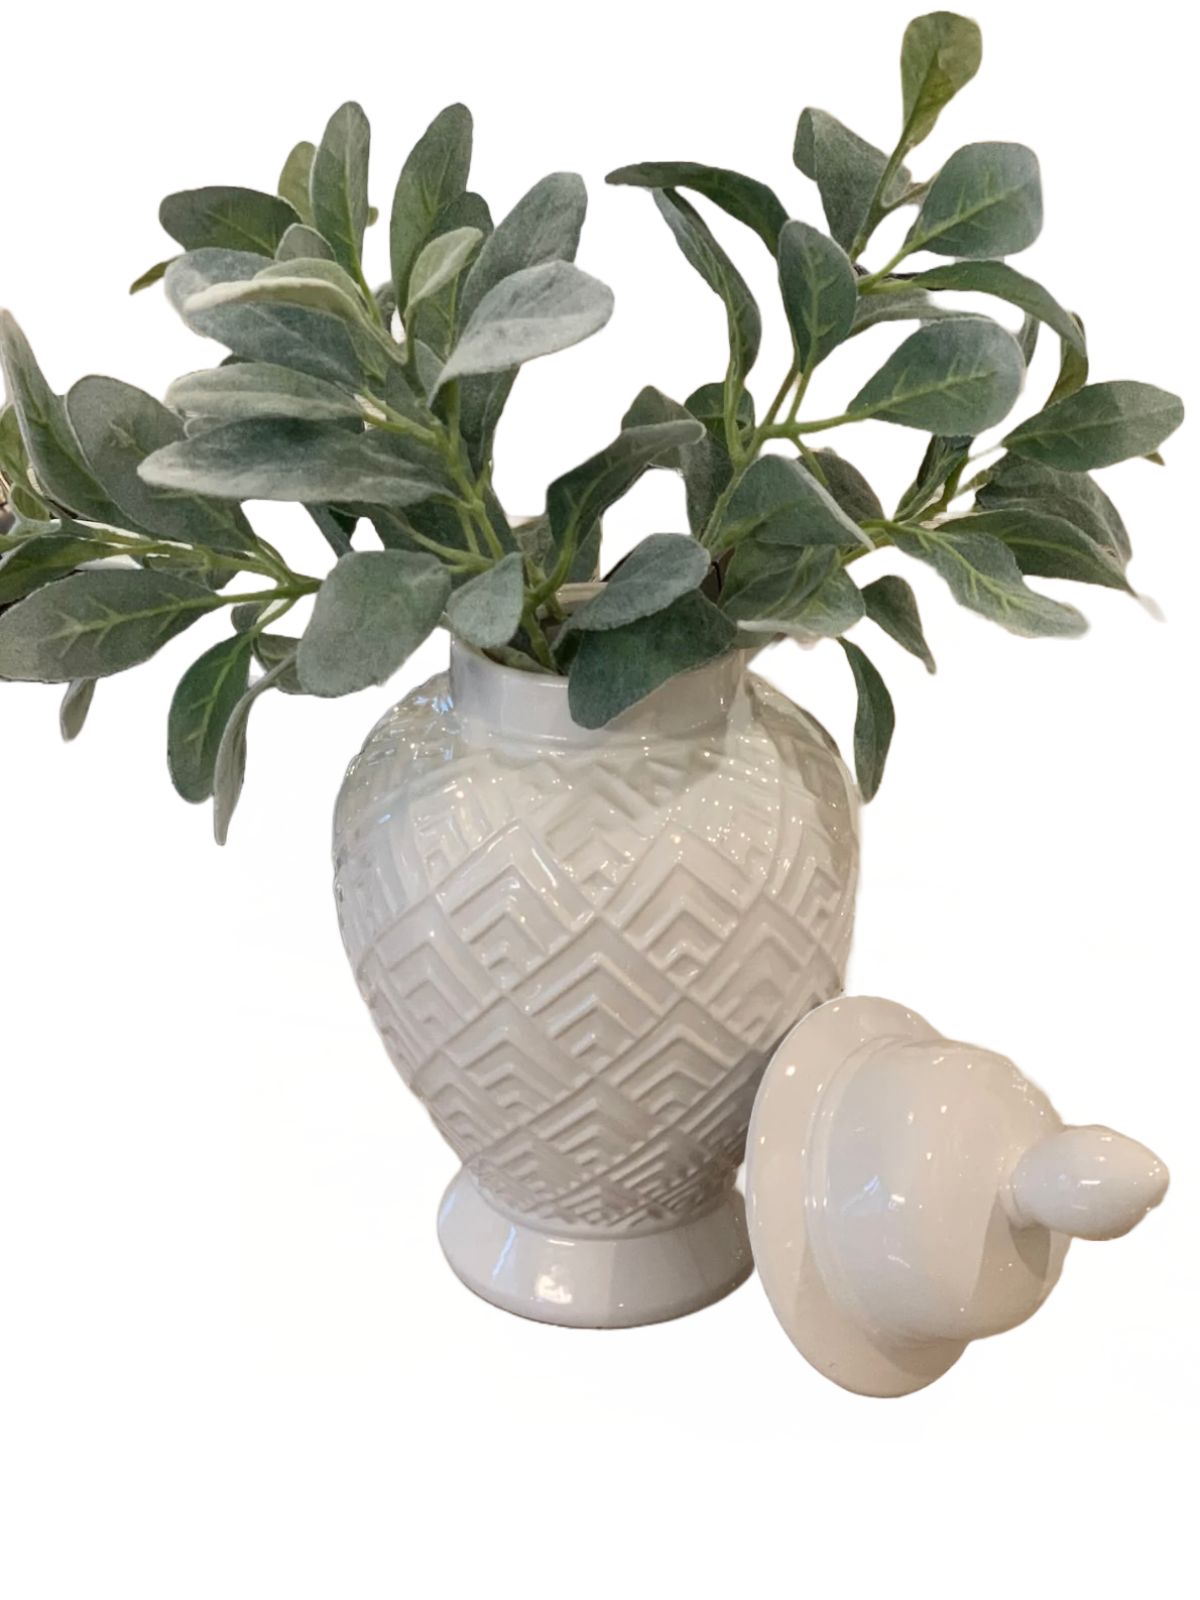 12.5H White ceramic ginger jar with diamond patterns with lid sold by KYA Home Decor.